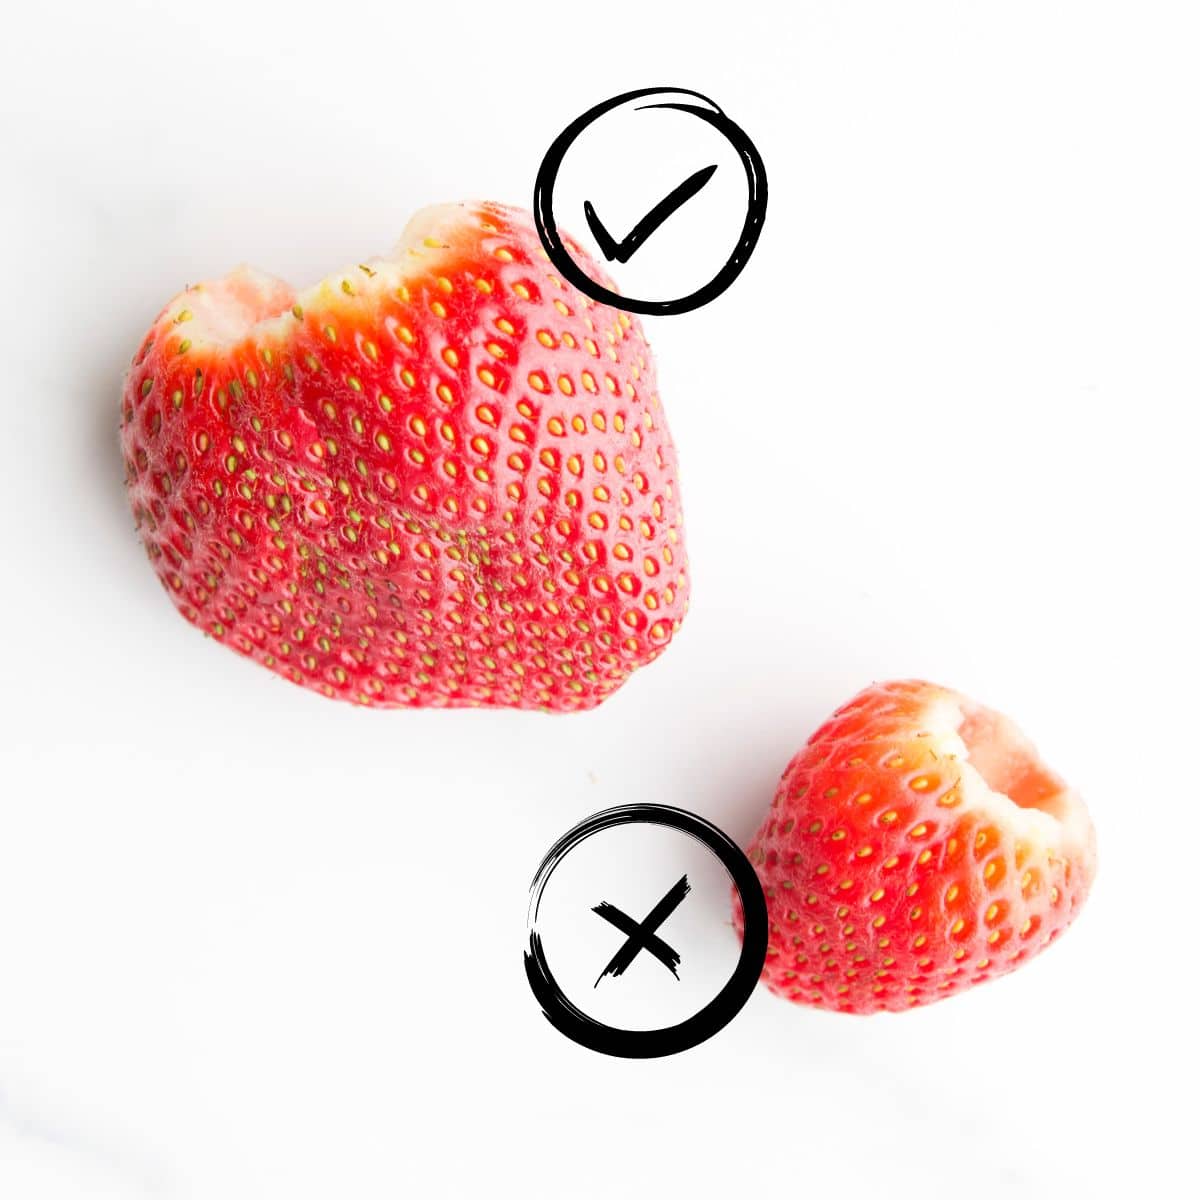 Image of a Large Strawberry with a Tick Next to It and a Small Strawberry with a Cross Next to It. 